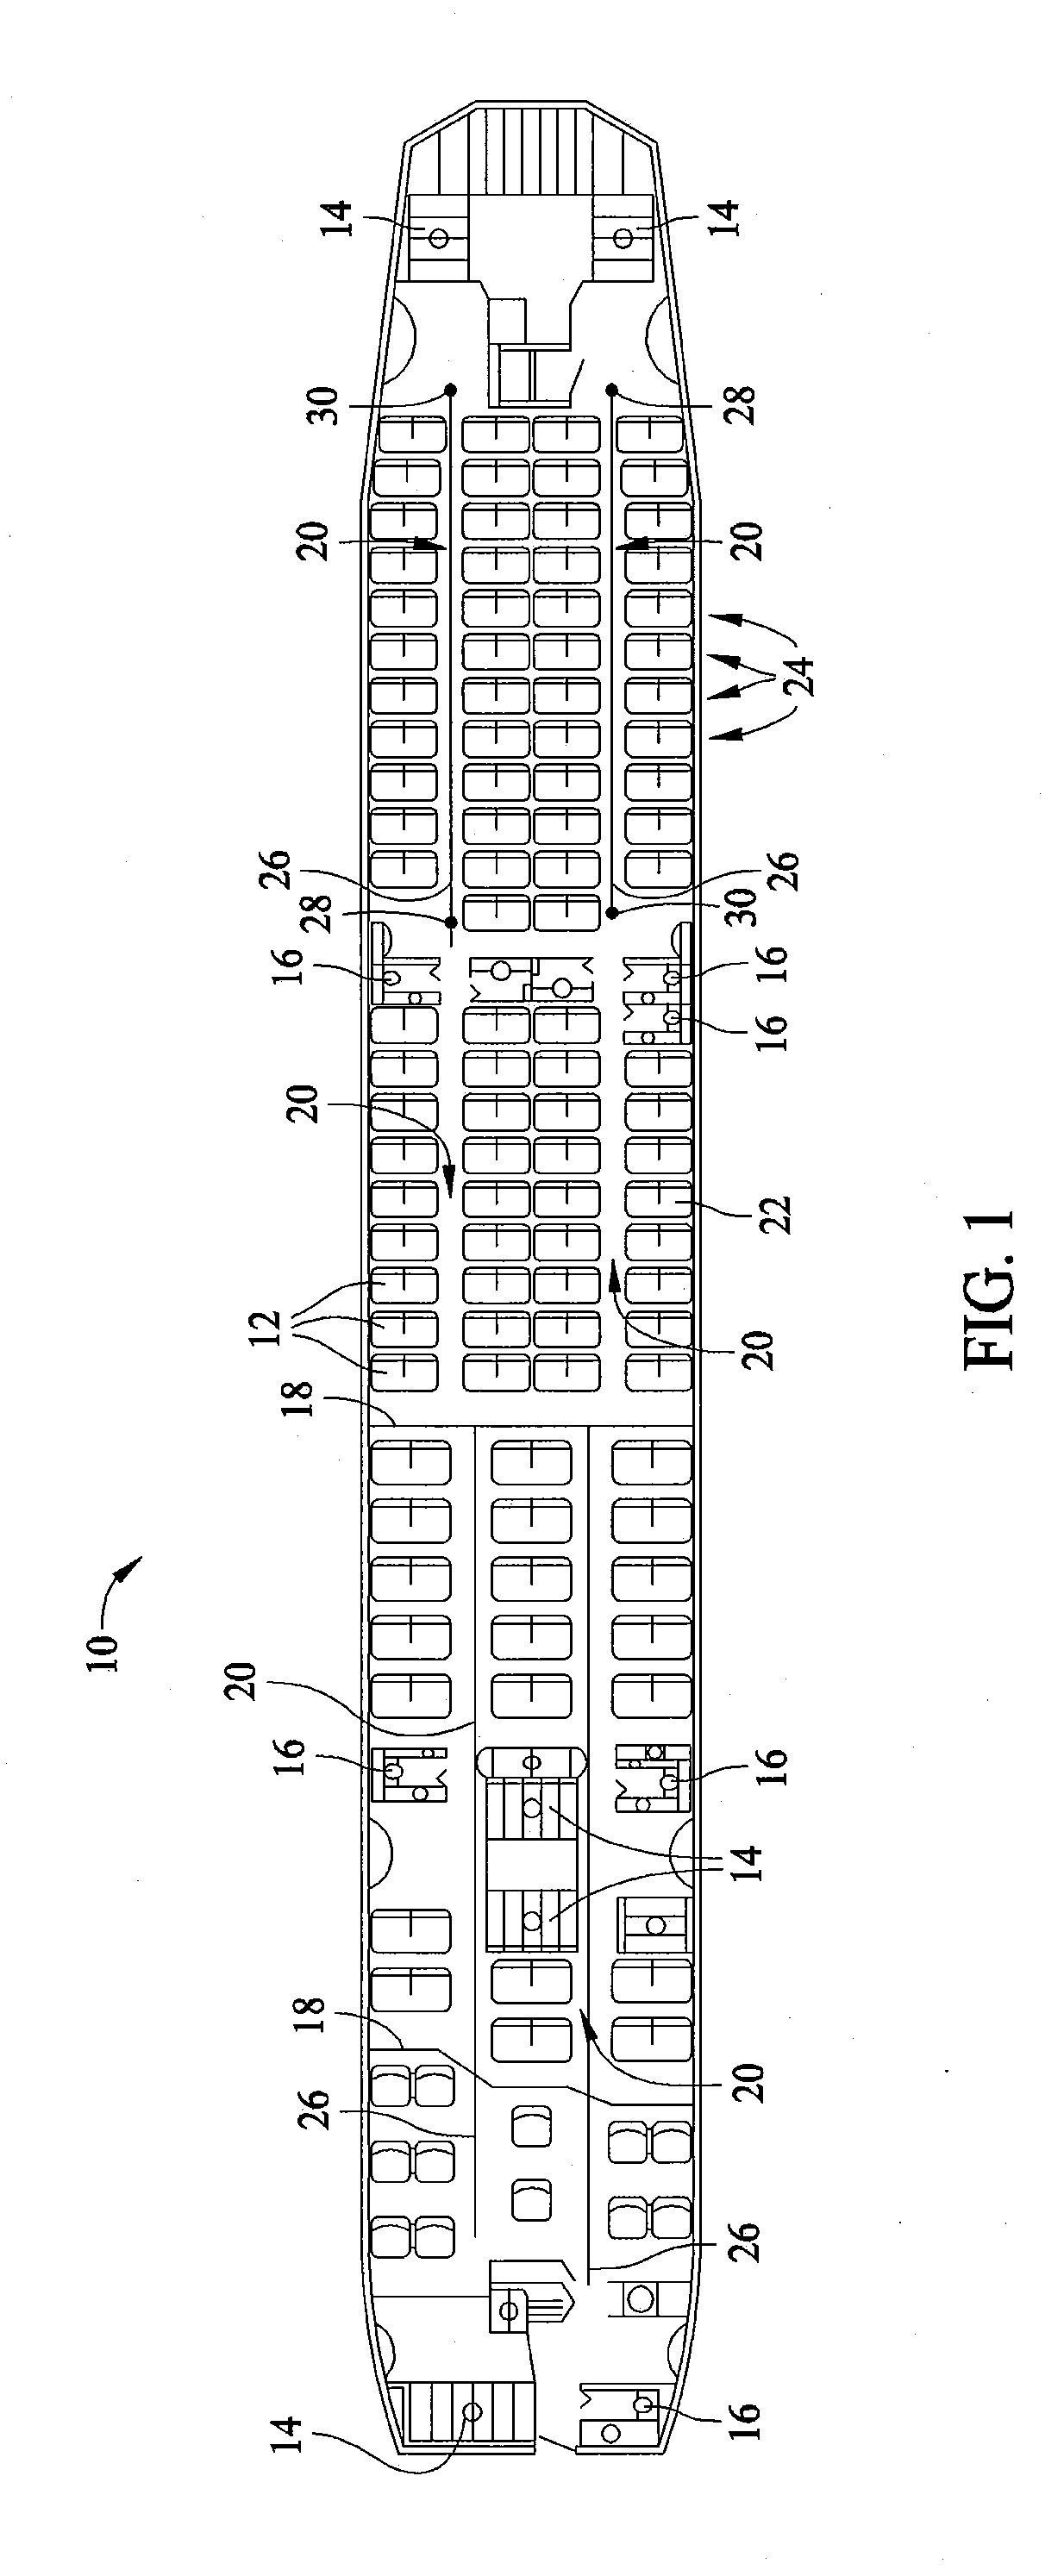 Methods and systems for automated safety device inspection using radio frequency identification